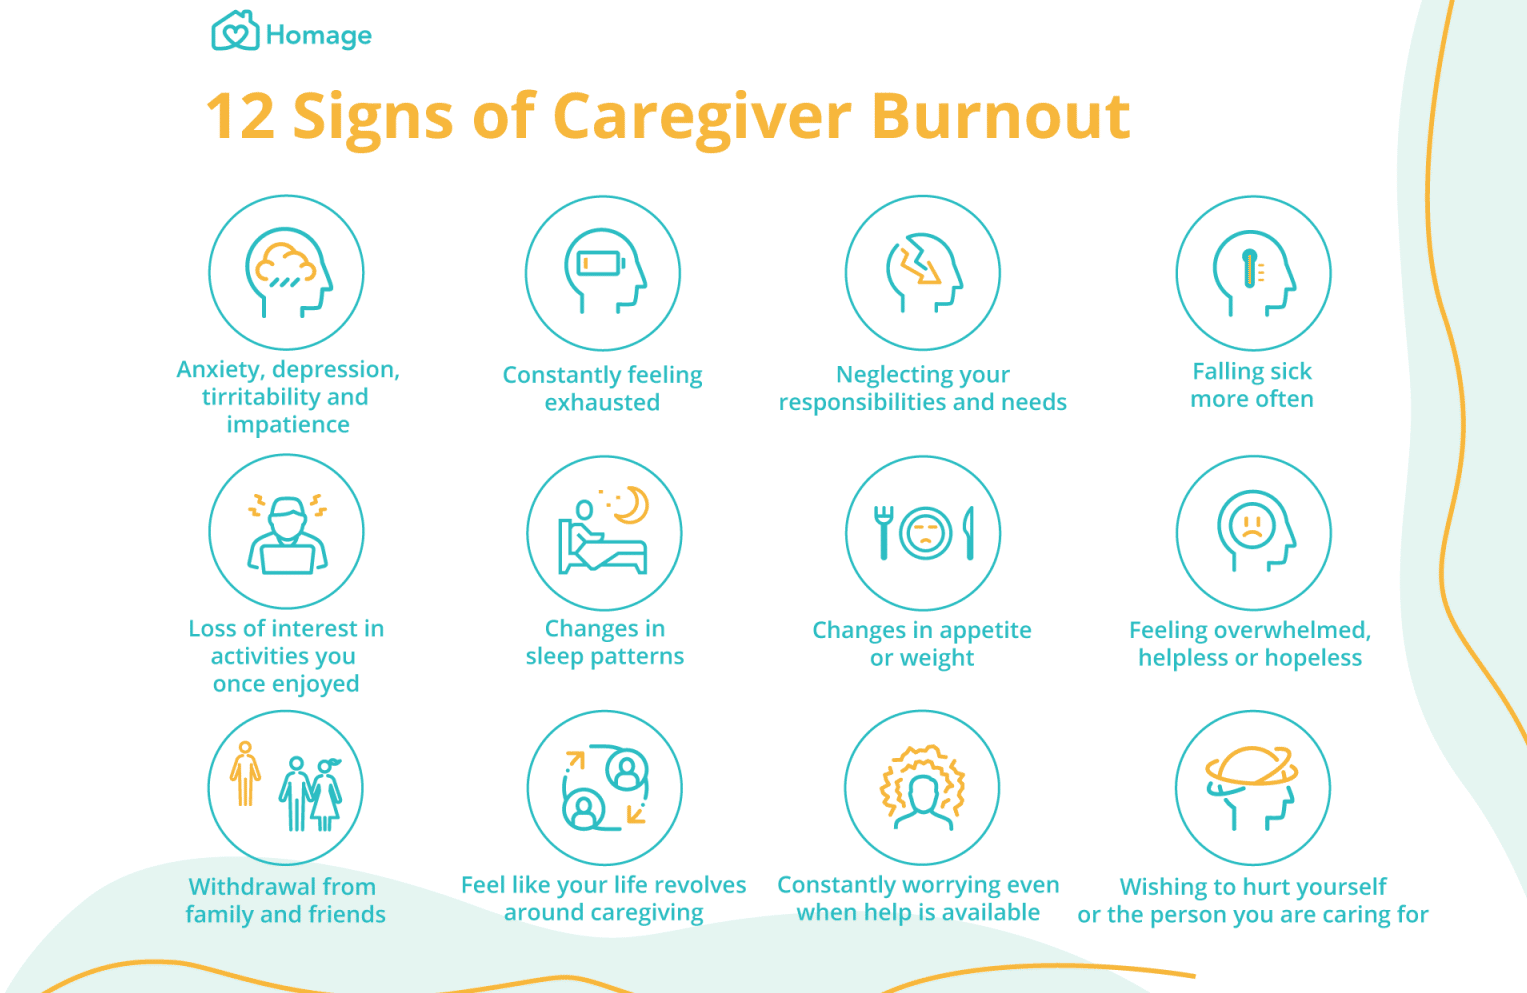 There are many signs of caregiver burnout. If you are unsure about what you are experiencing, look out for some of these signs here.